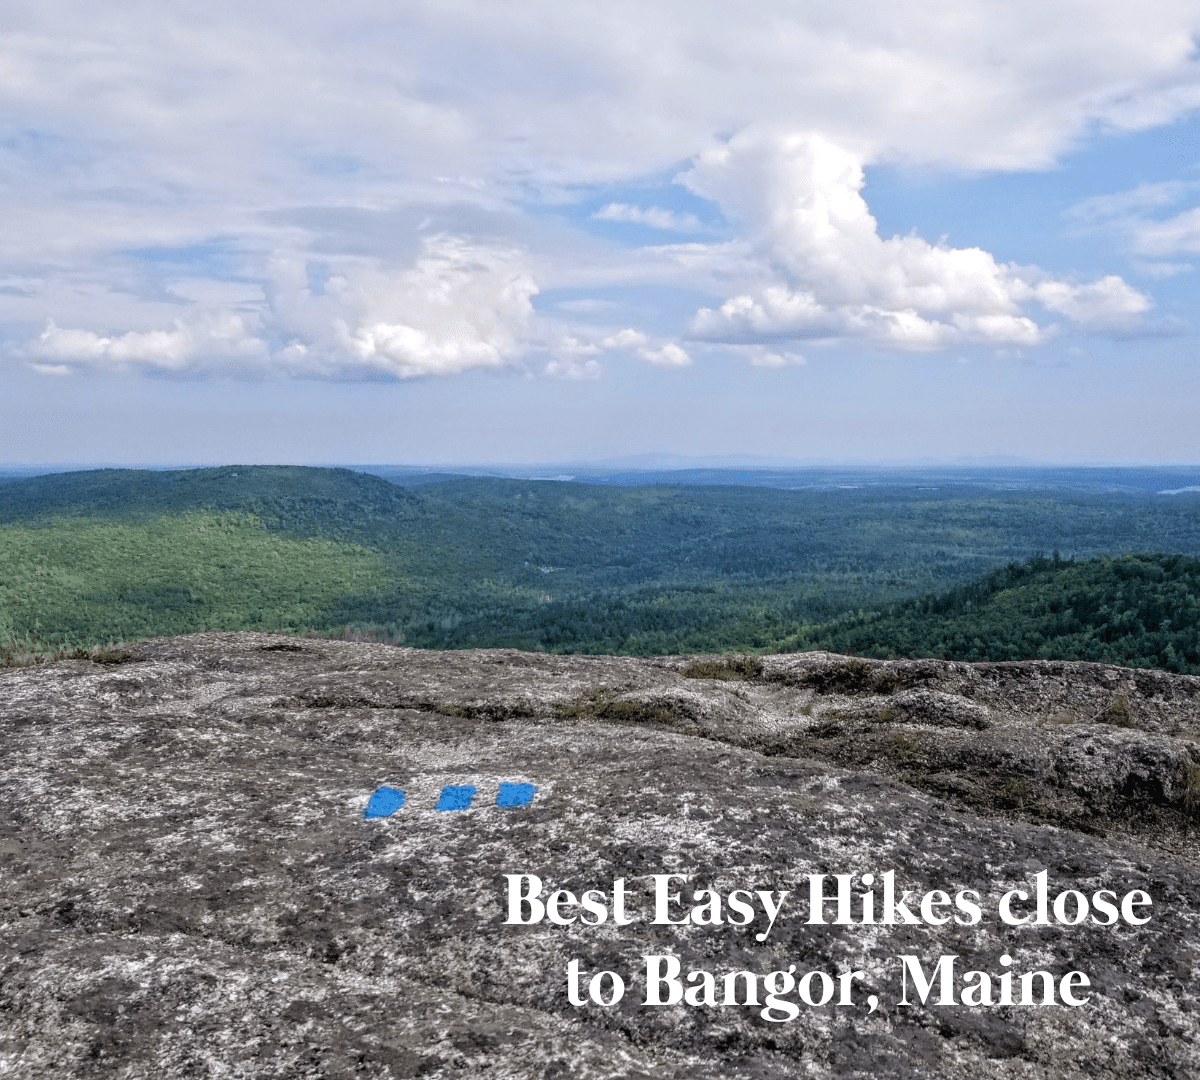 You are currently viewing Best Easy Hikes close to Bangor, Maine